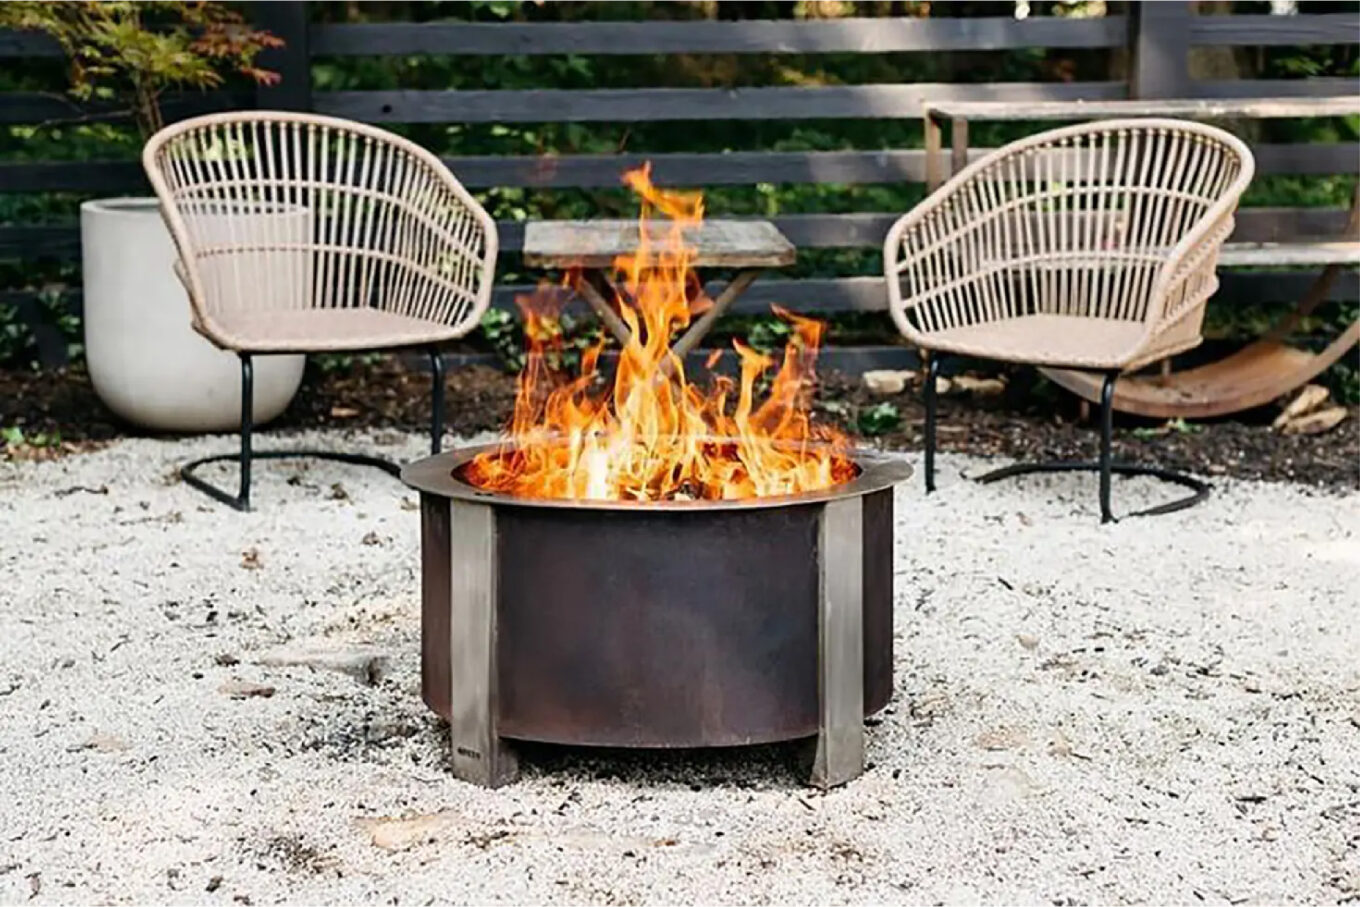 Best Smokeless Wood Burning Fire pit of 2023